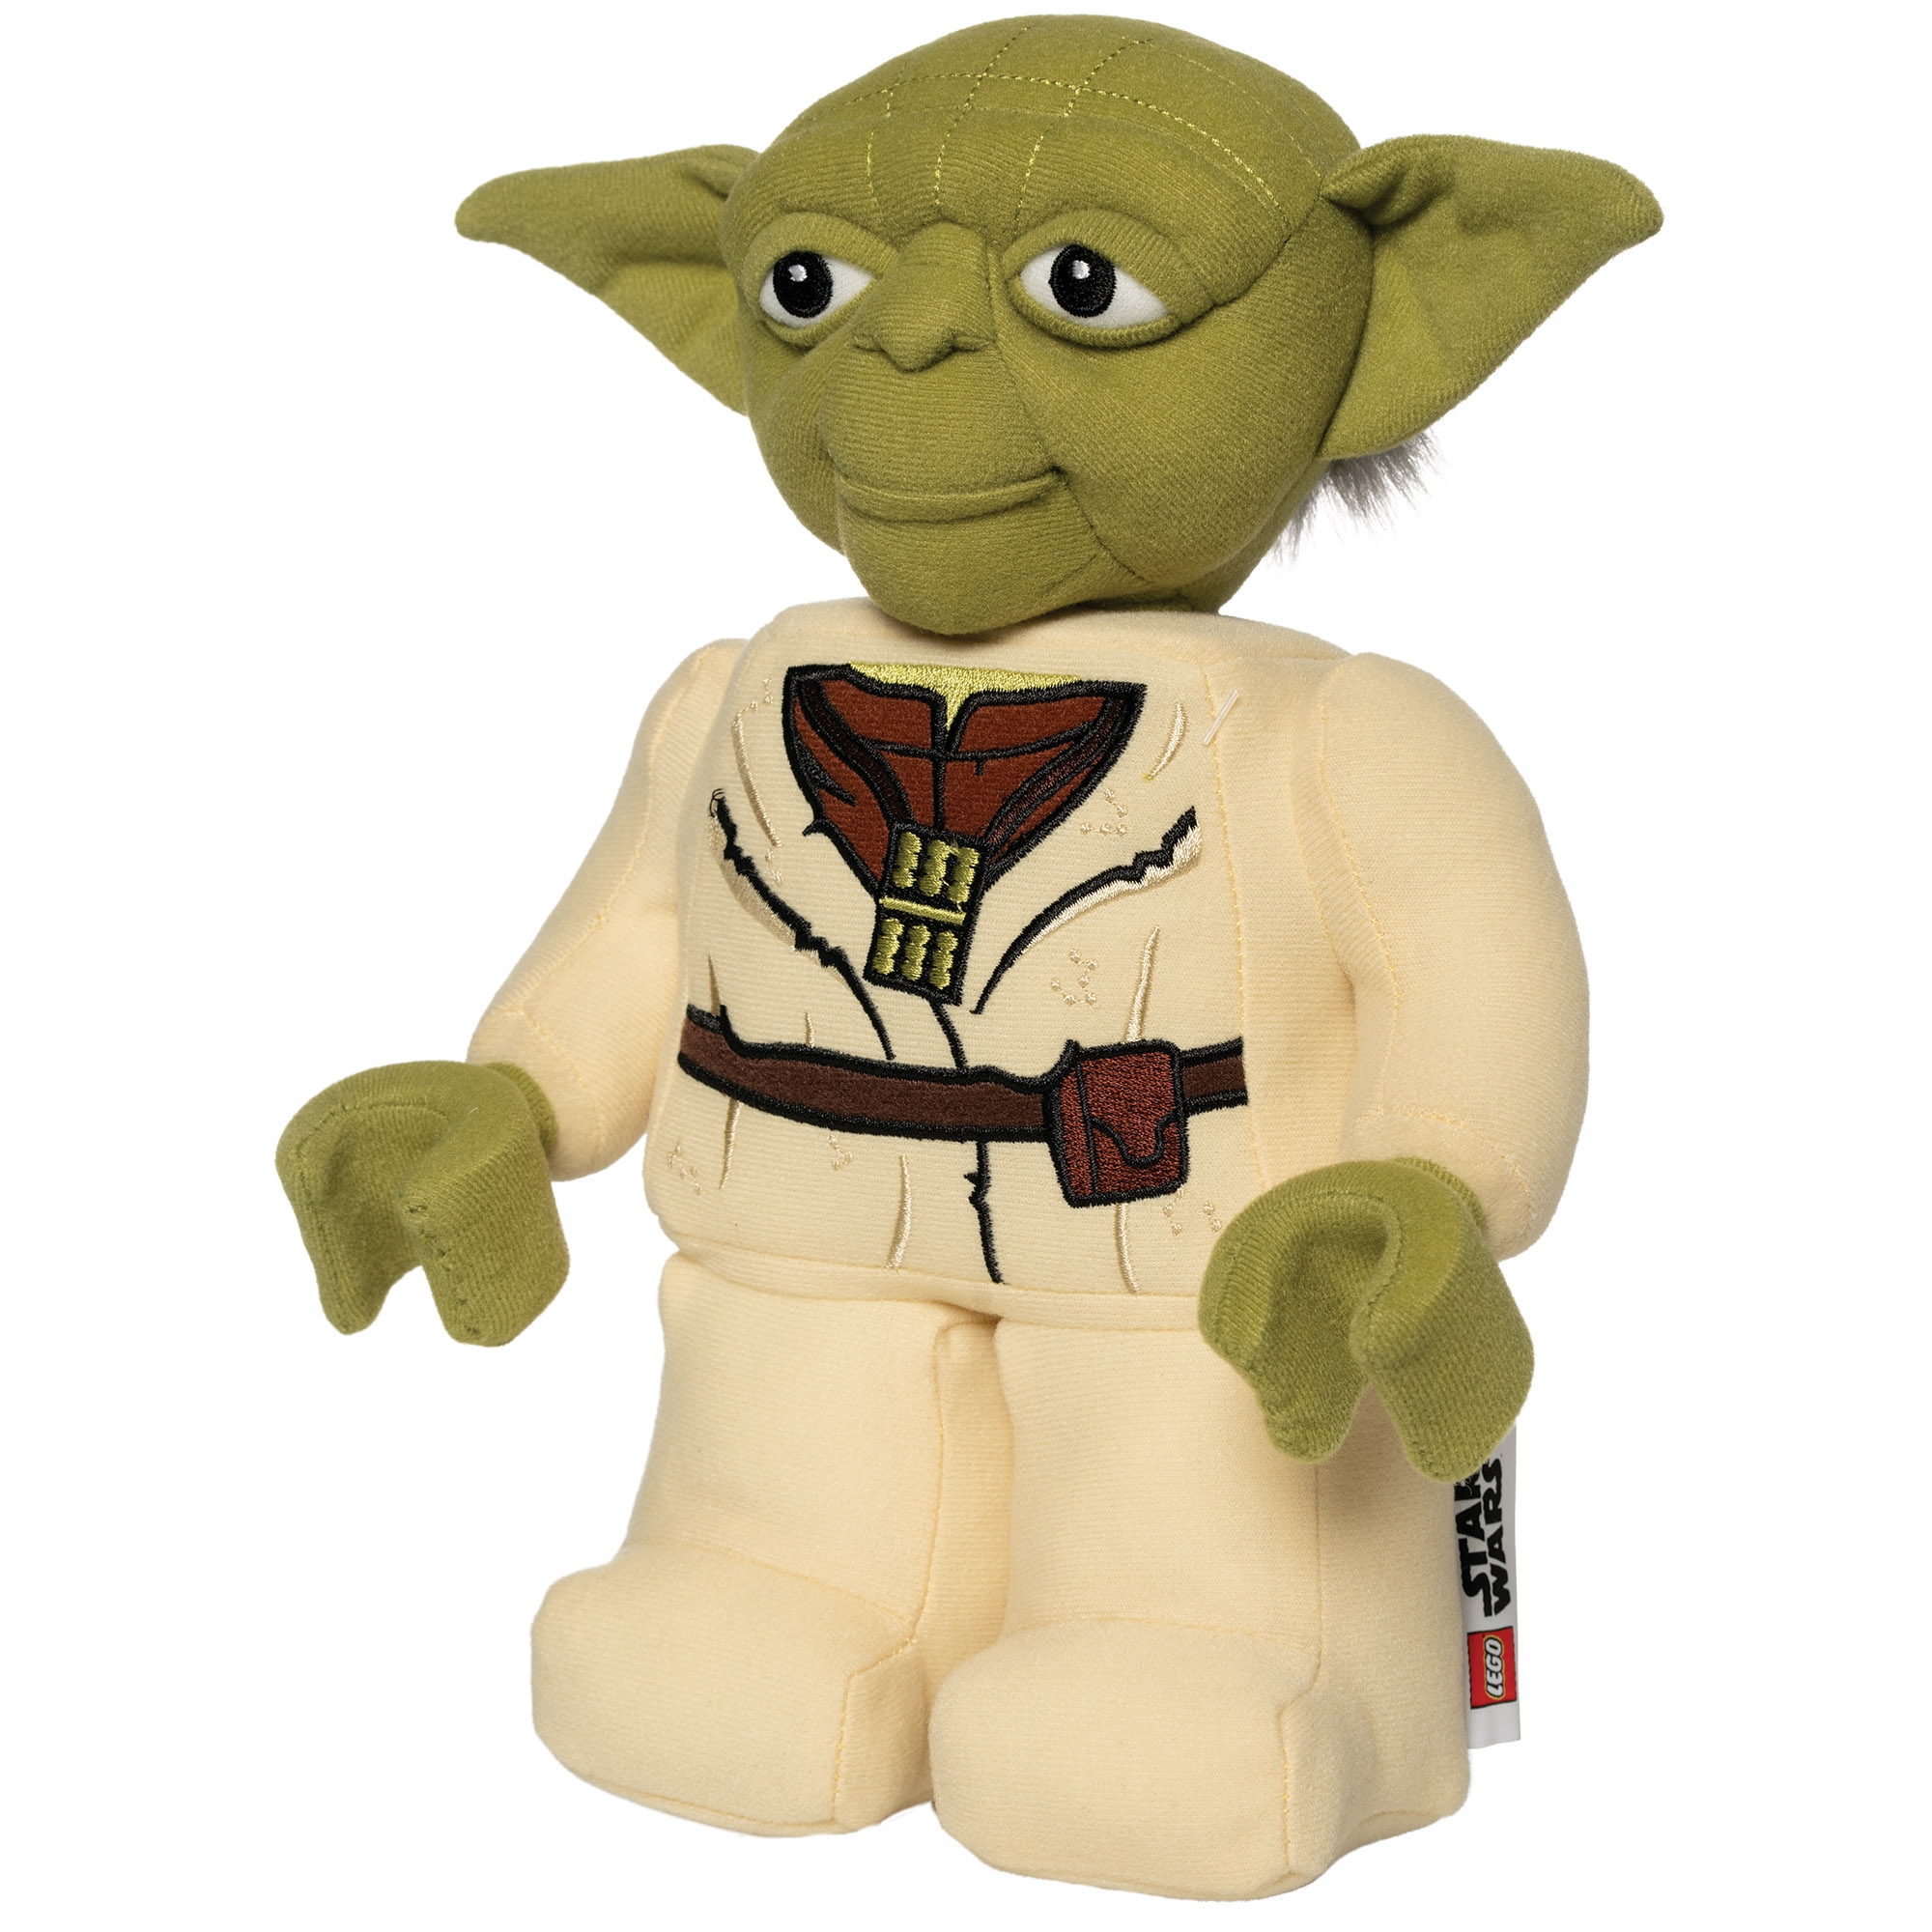 Plush 5006623 | Wars™ | Buy online at the LEGO® Shop US